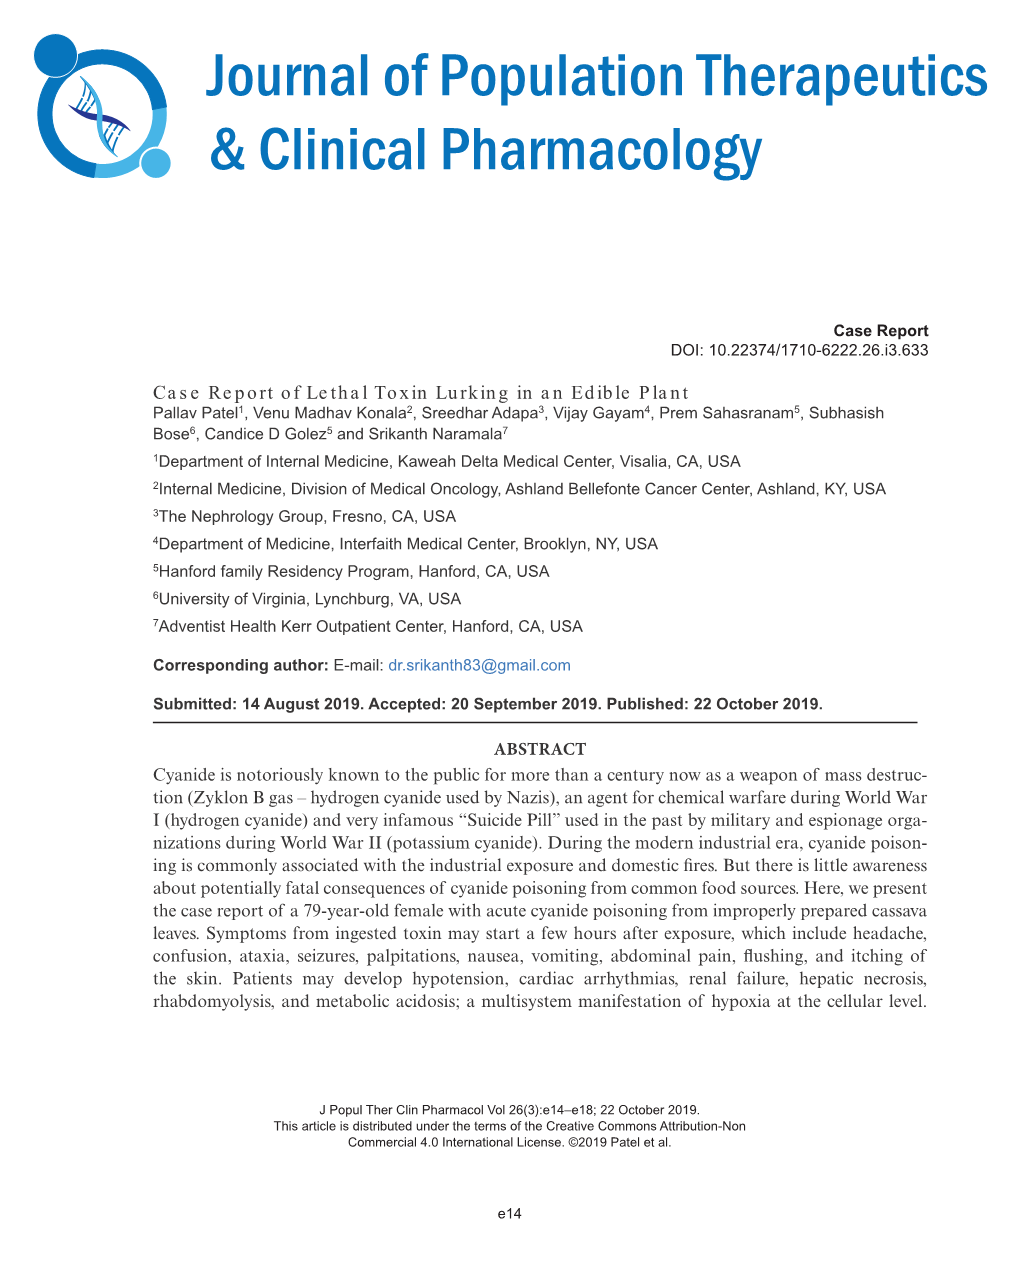 Journal of Population Therapeutics & Clinical Pharmacology